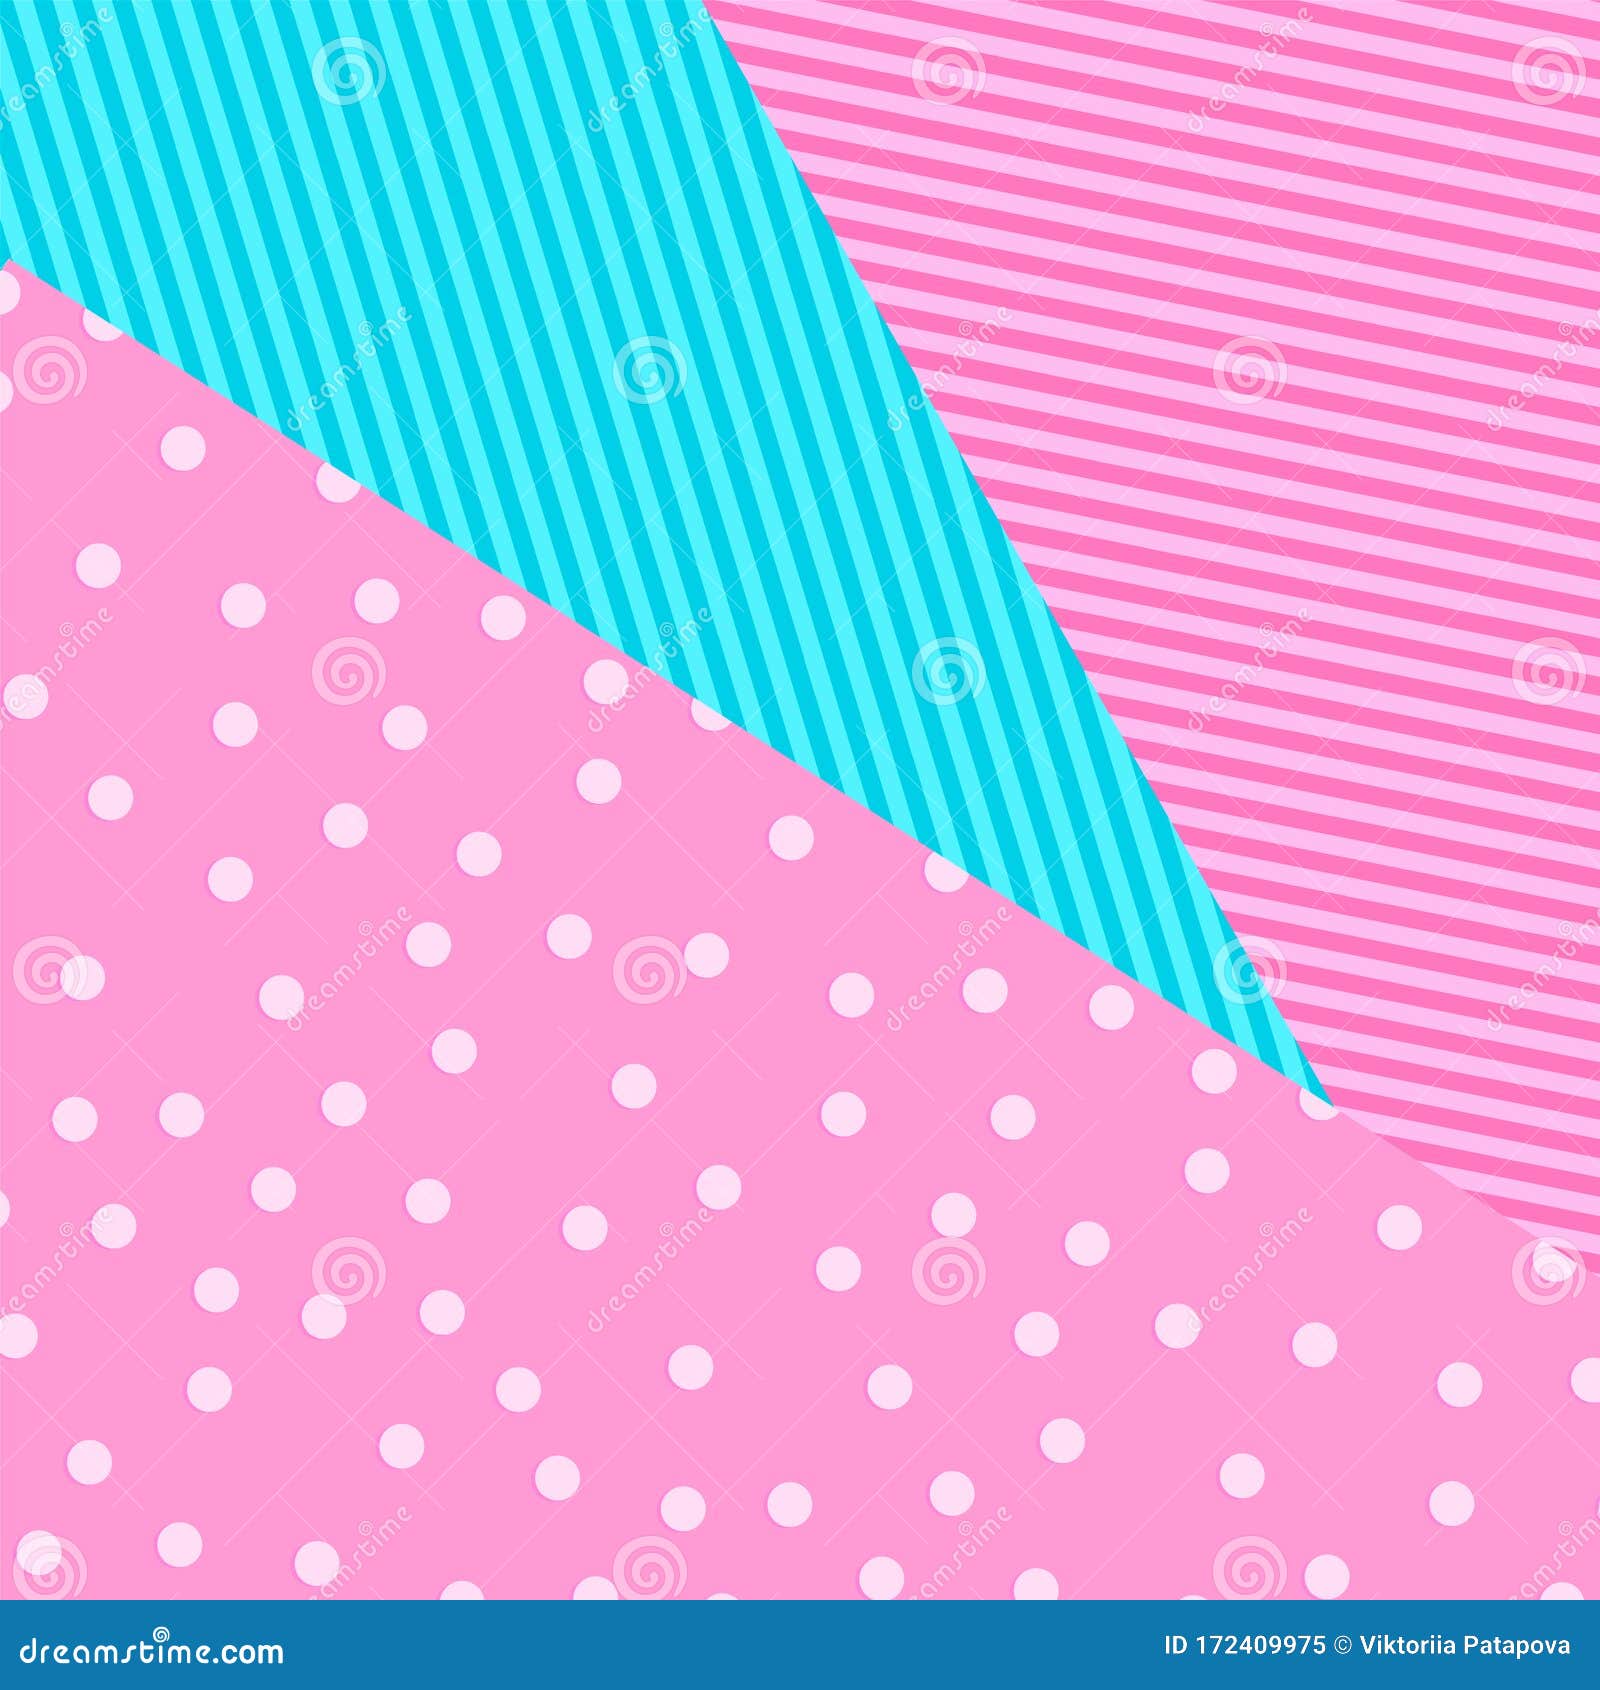 Cute Pattern Background in Princess Lol Doll Surprise Style. Vector